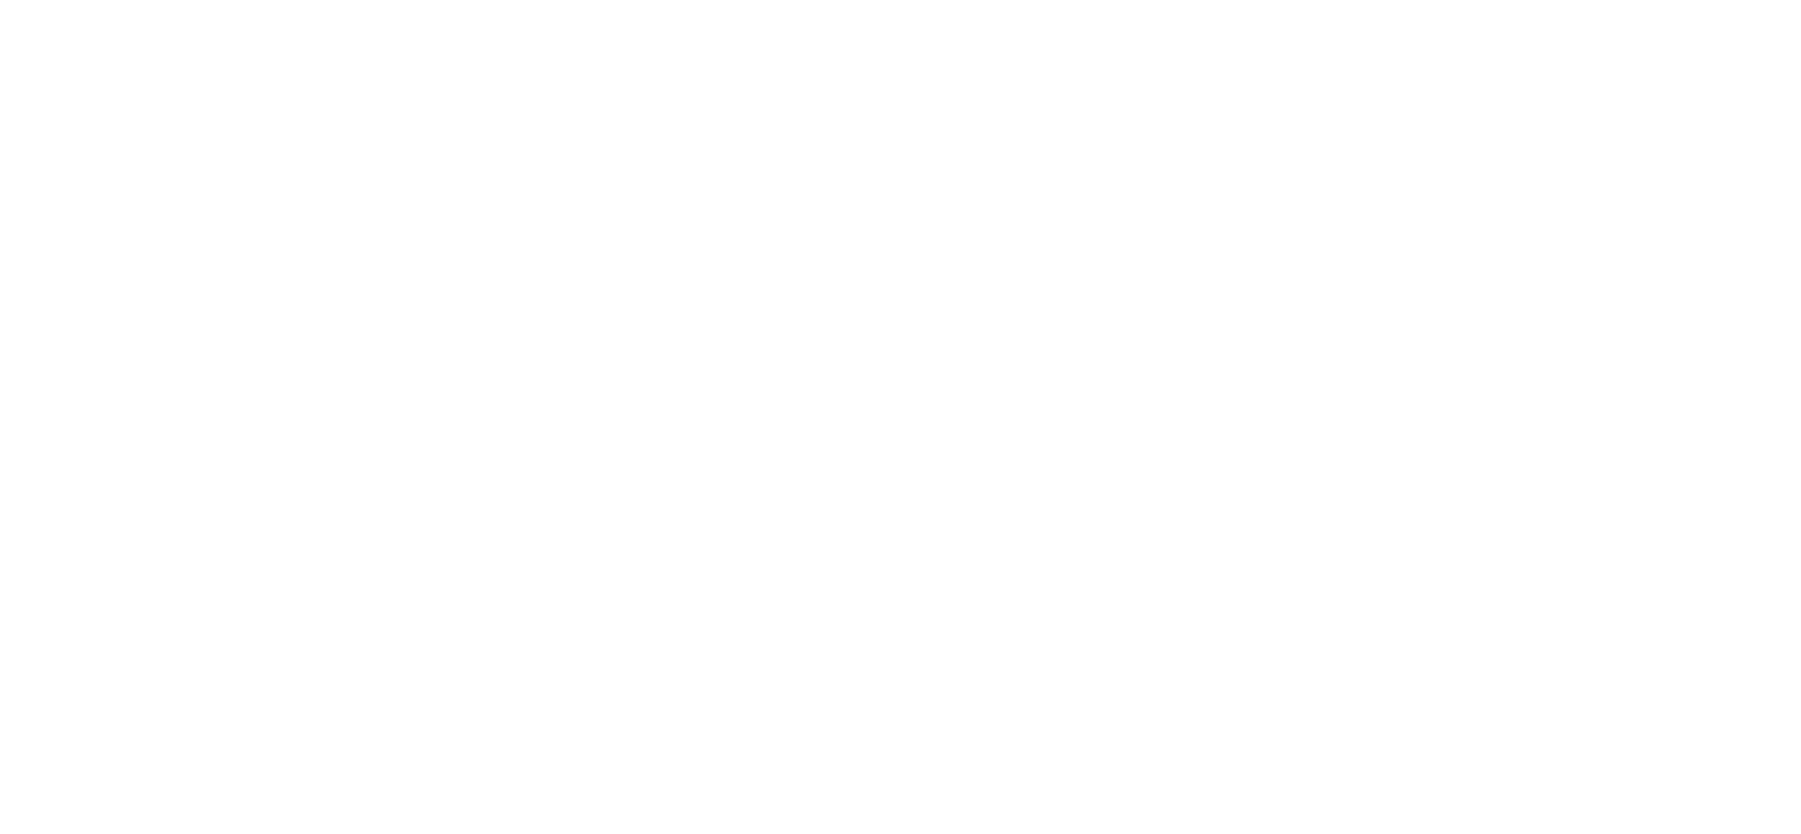 Chase QuickPay Logo - Introducing Zelle